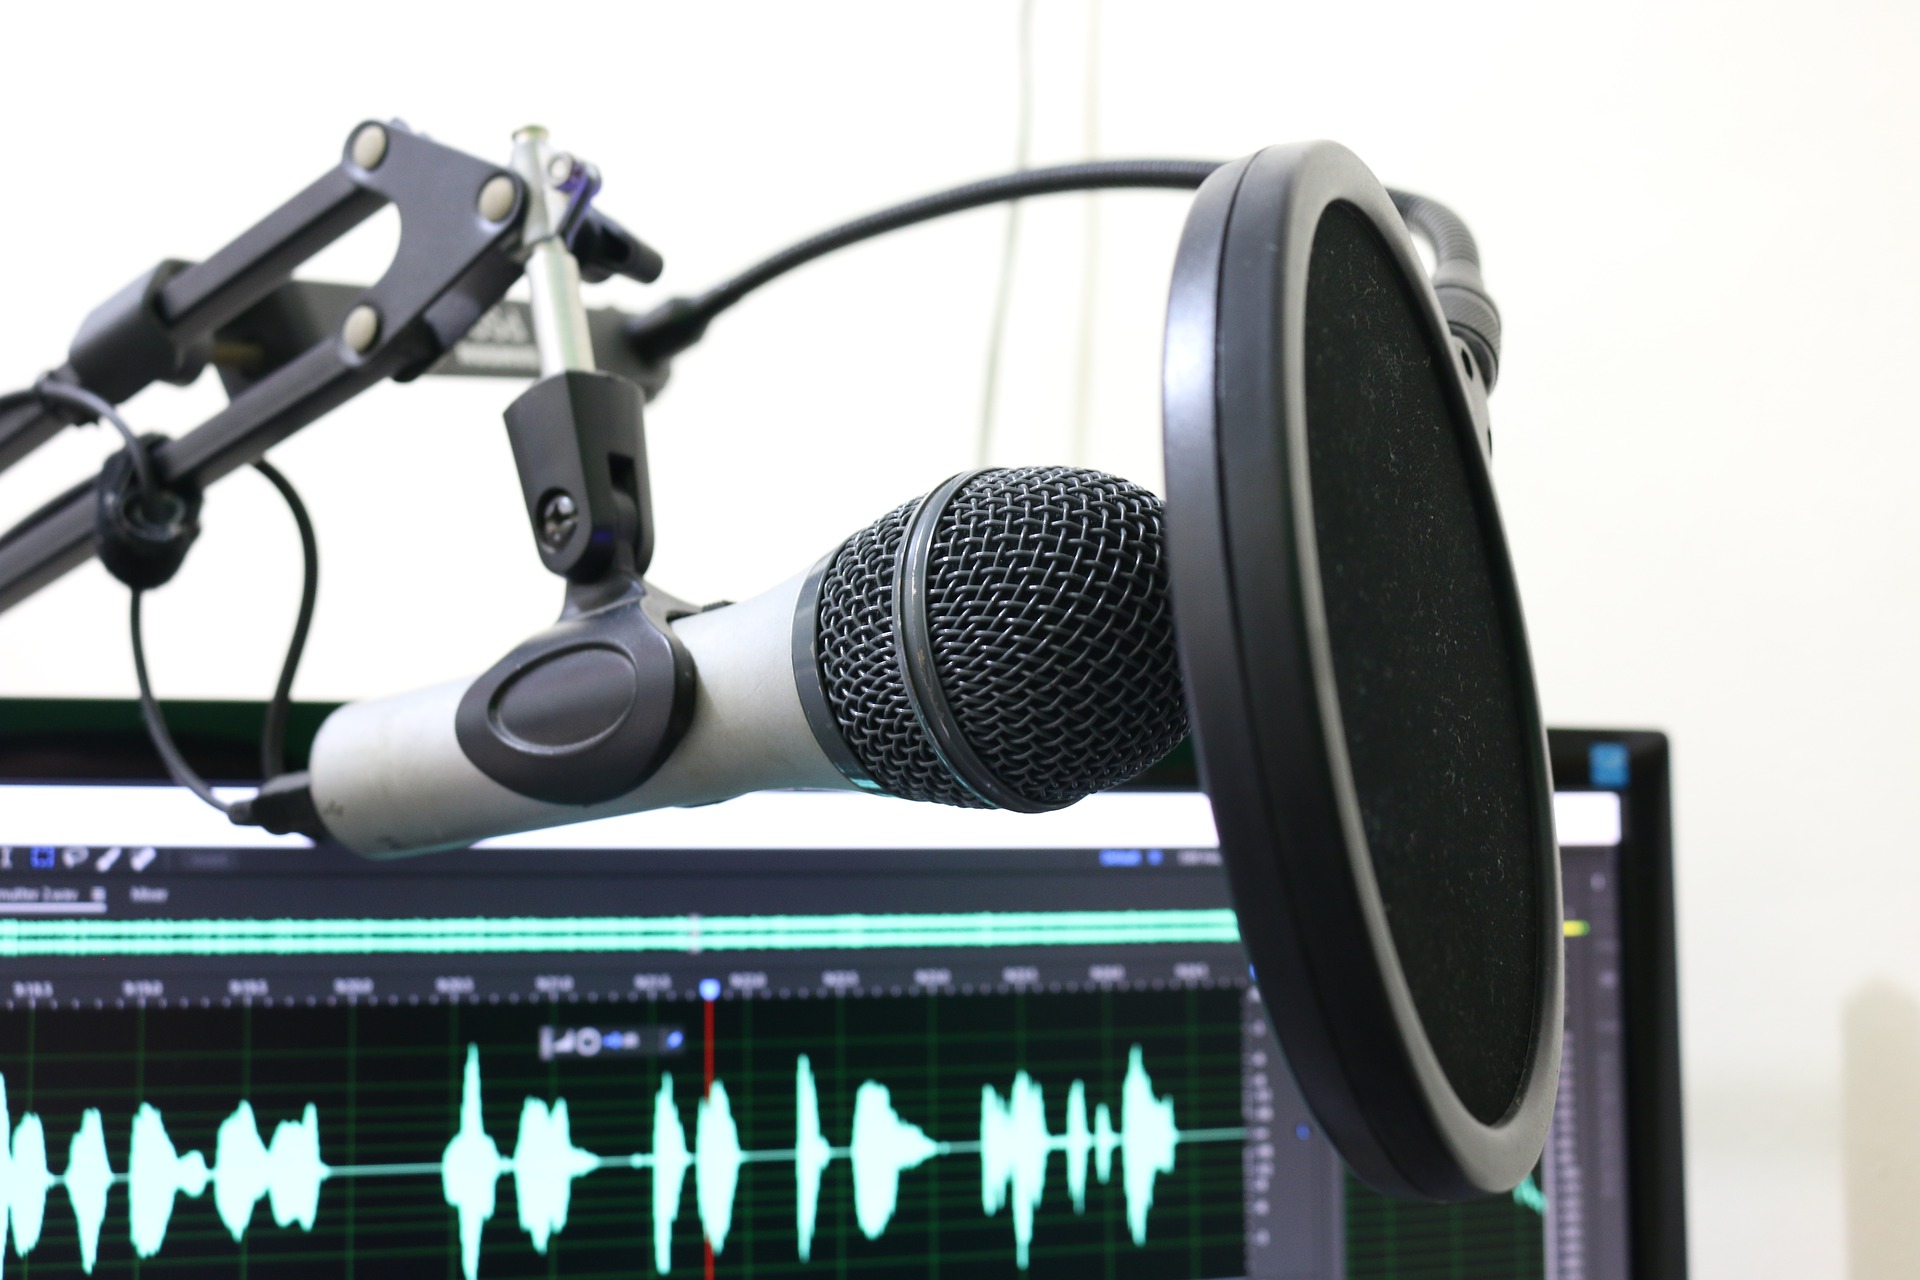 microphone and software used for real estate podcasting